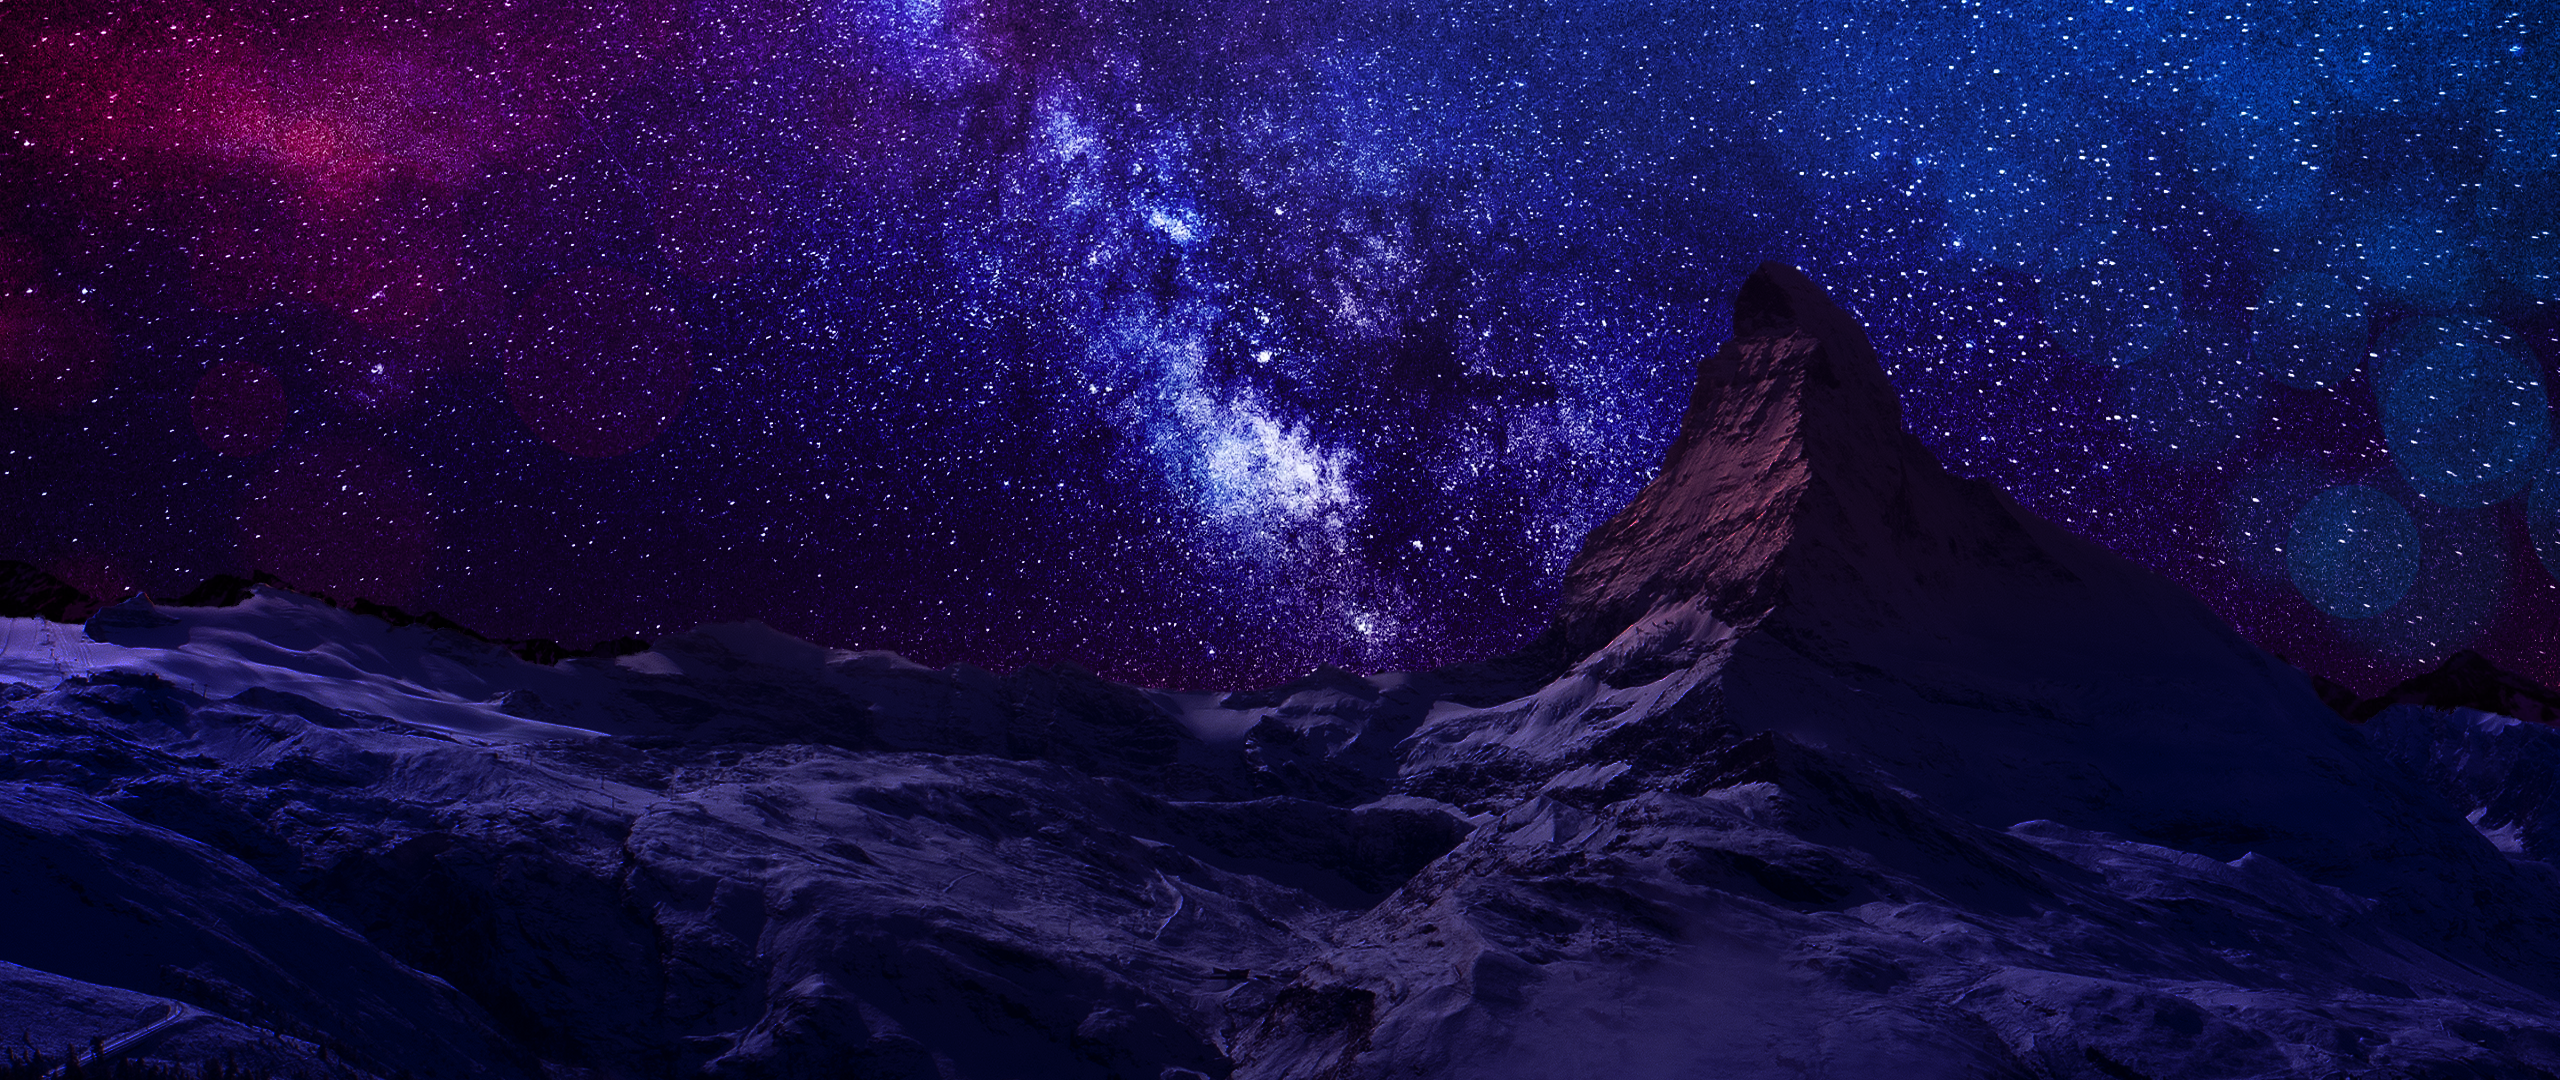 Starry Mountain Night Wallpapers